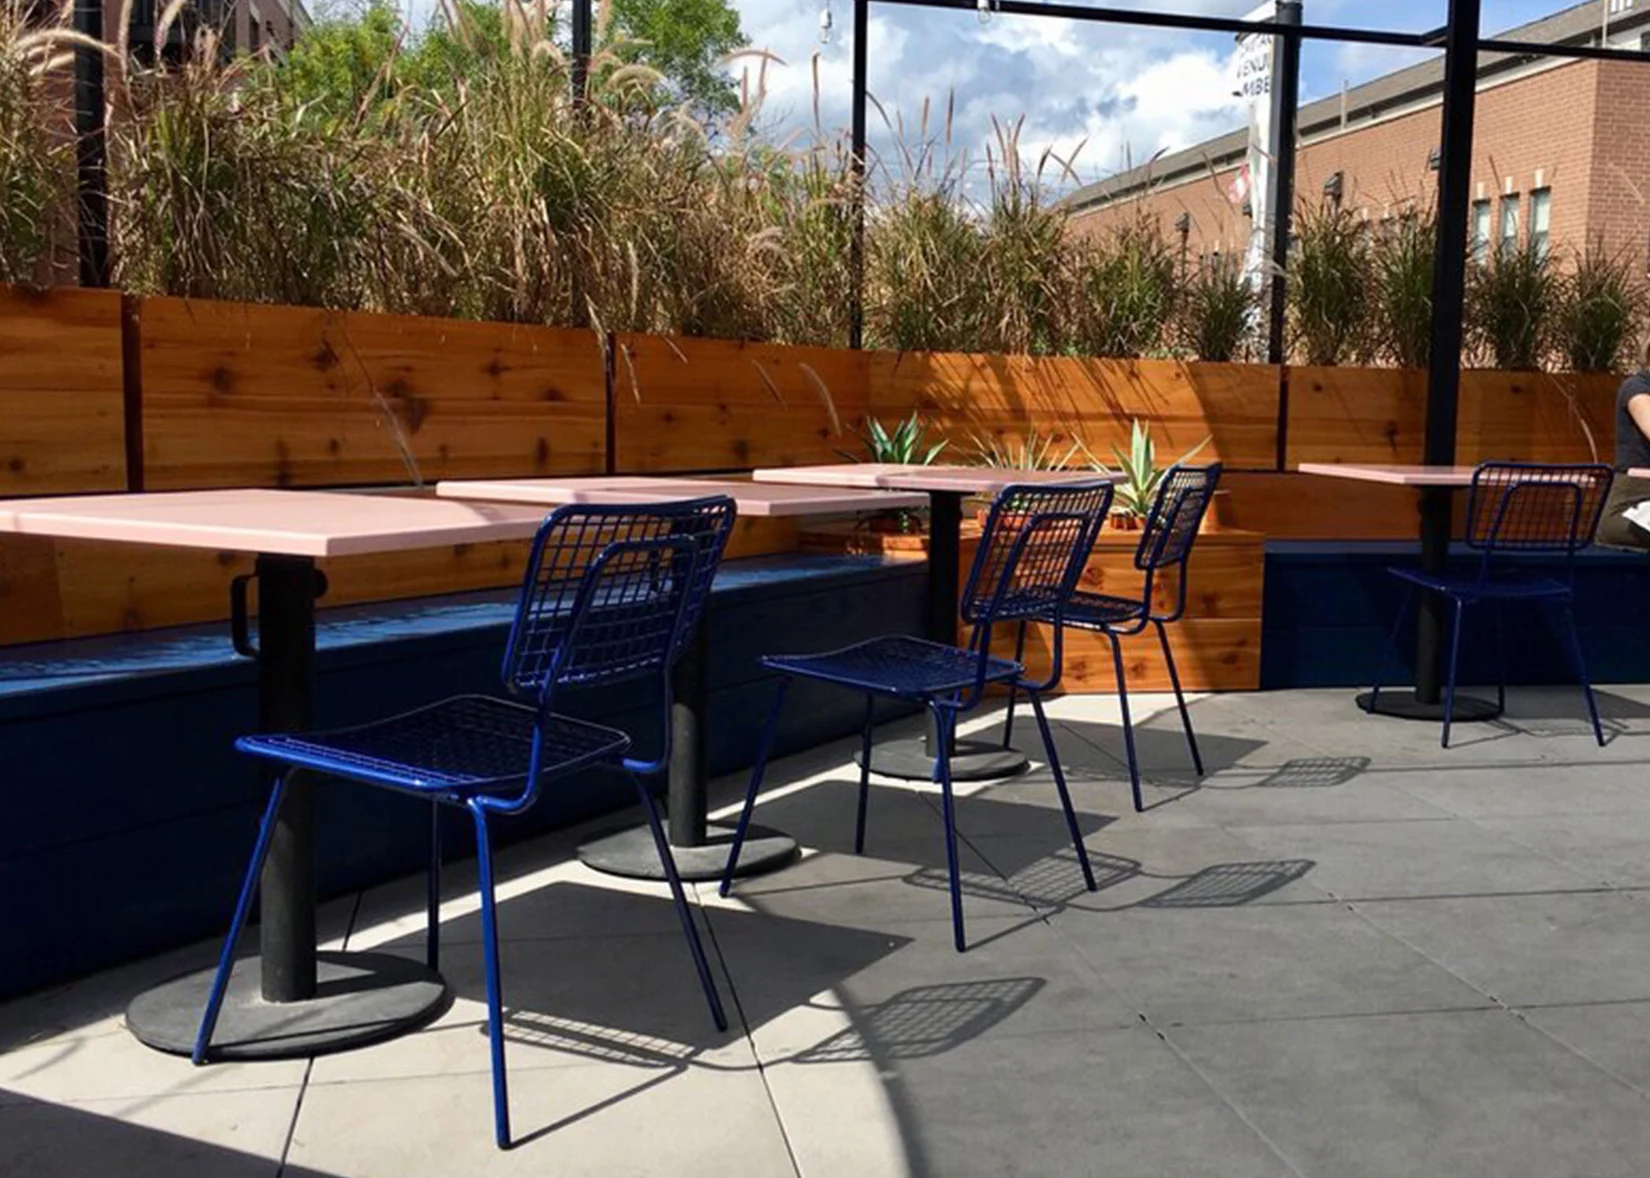 Opla Chairs in outdoor restaurant patio.